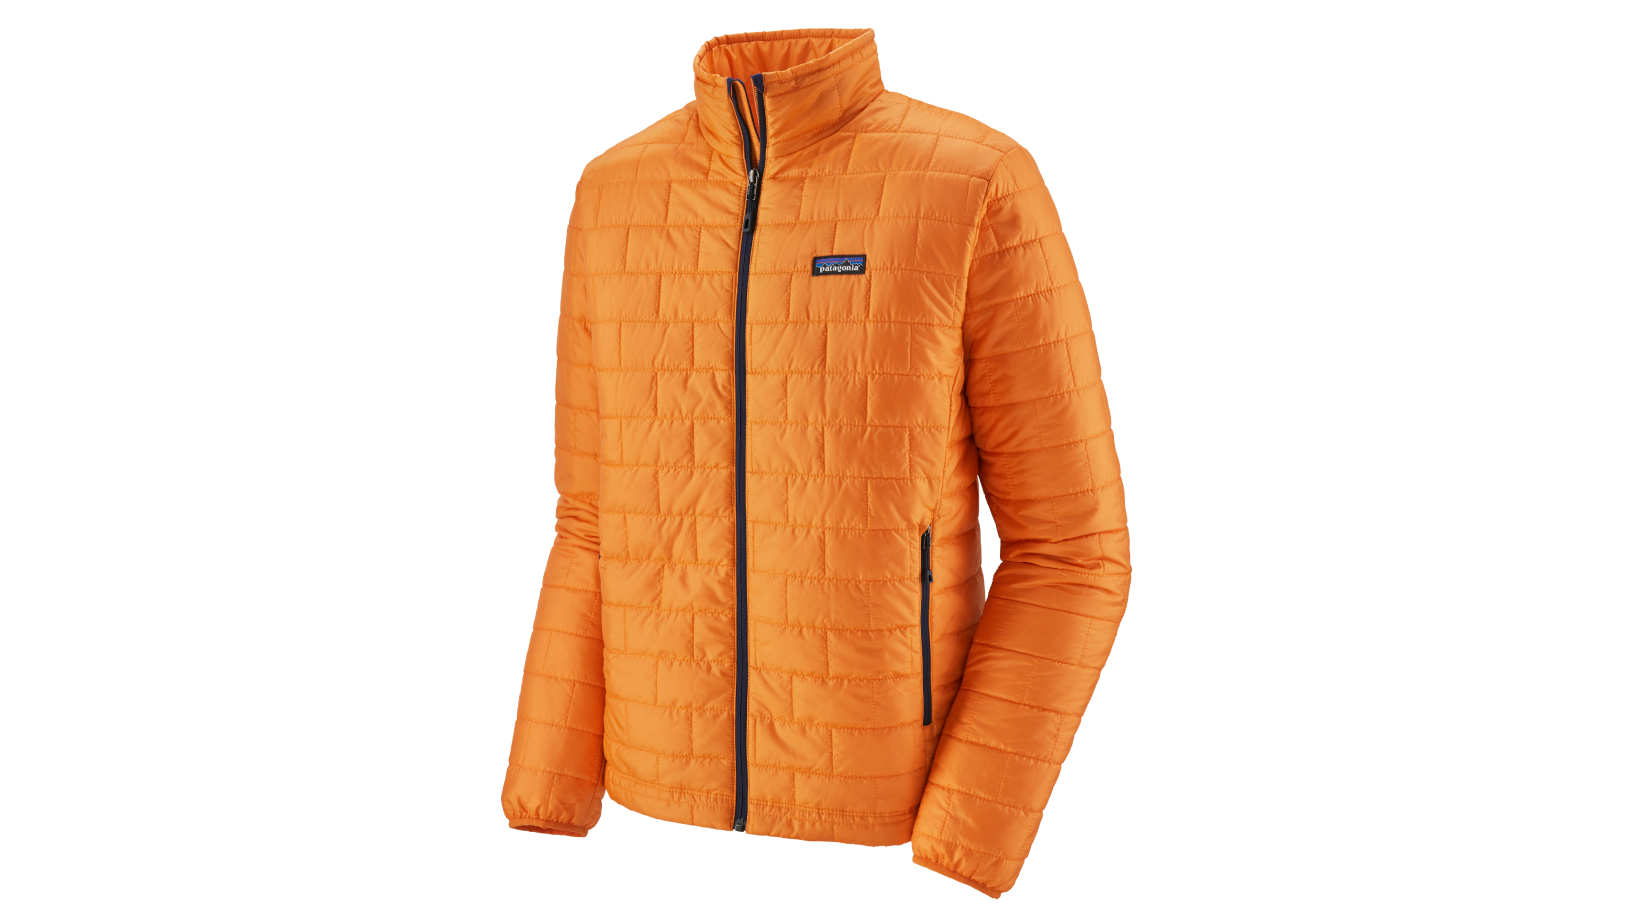 Patagonia Nano Puff women’s jacket review: a light and breathable ...